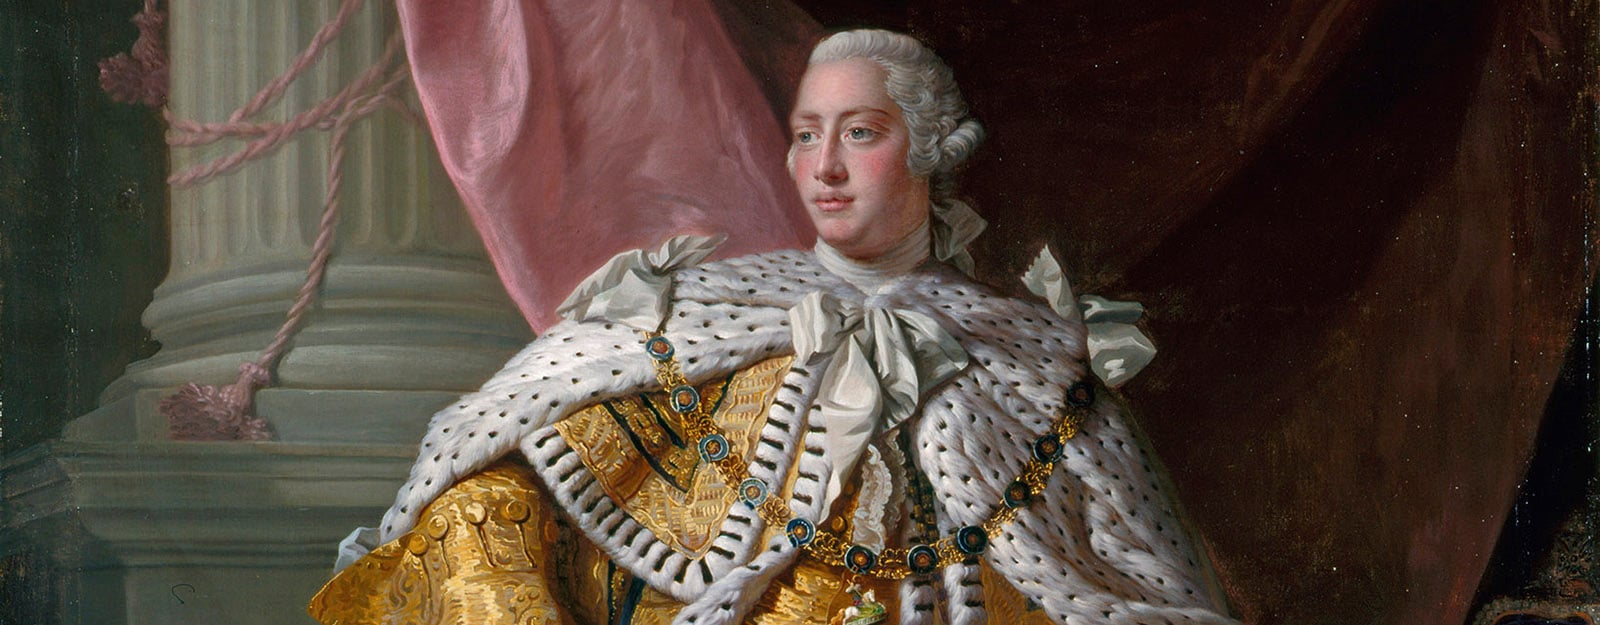 George III stands wearing his yellow coronation robes.